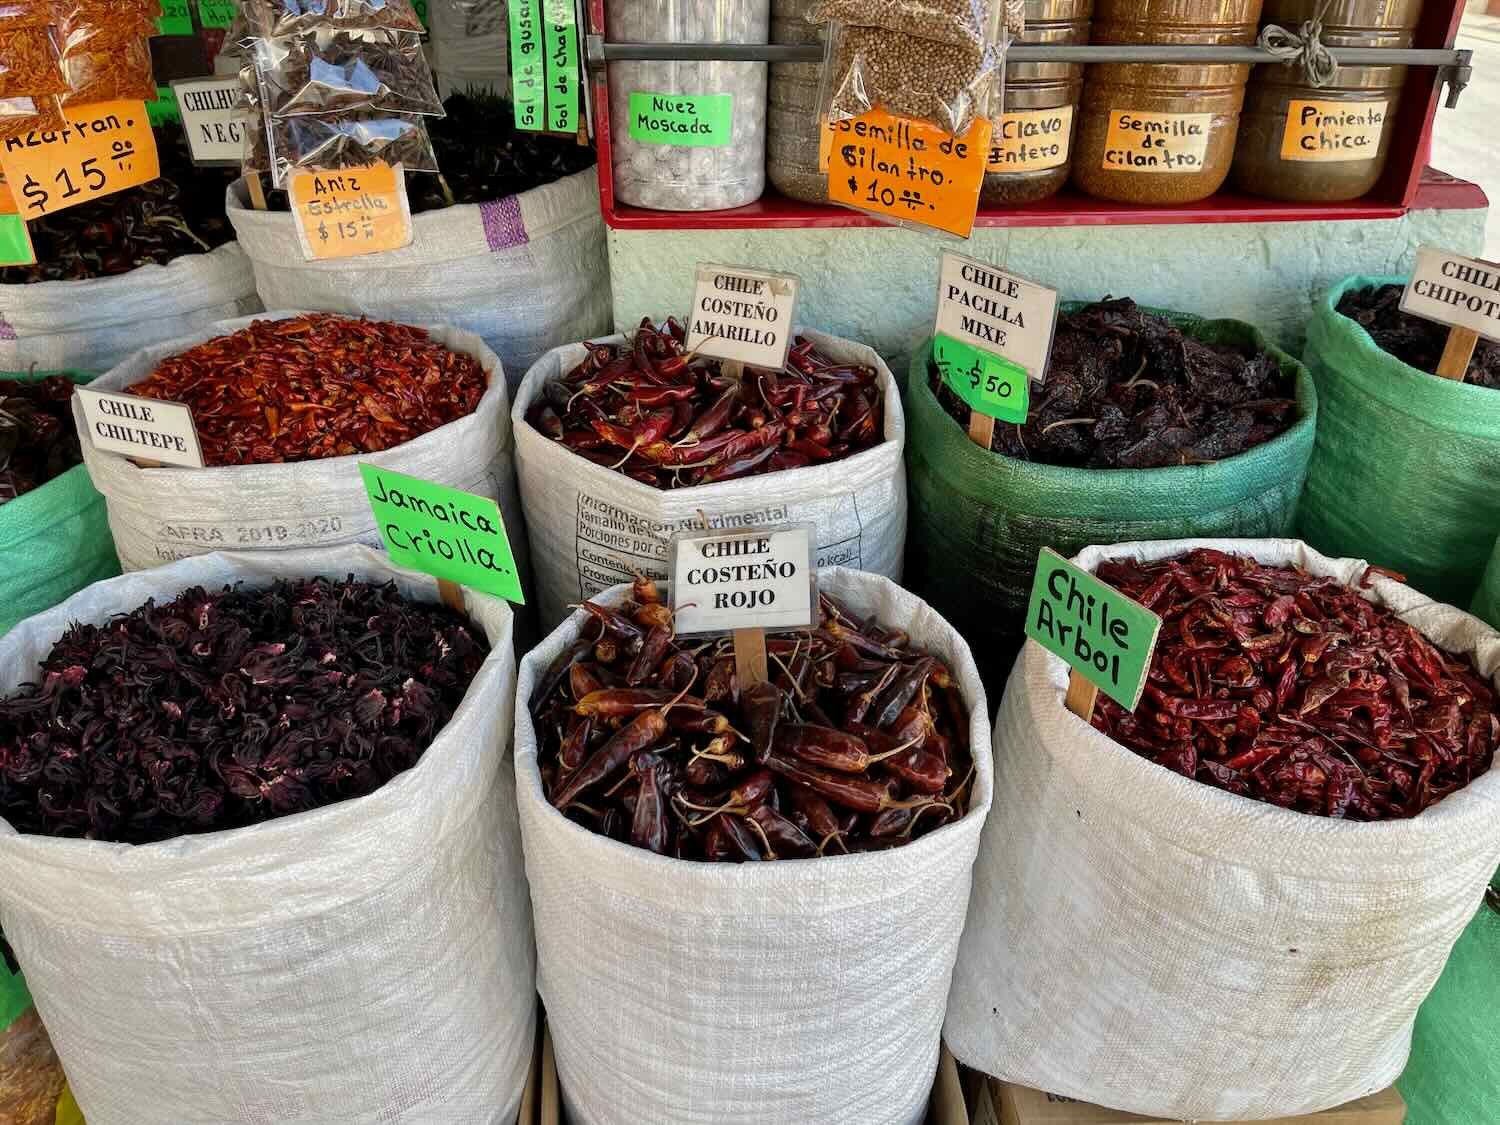 There are many varieties of chilis, one for every culinary need